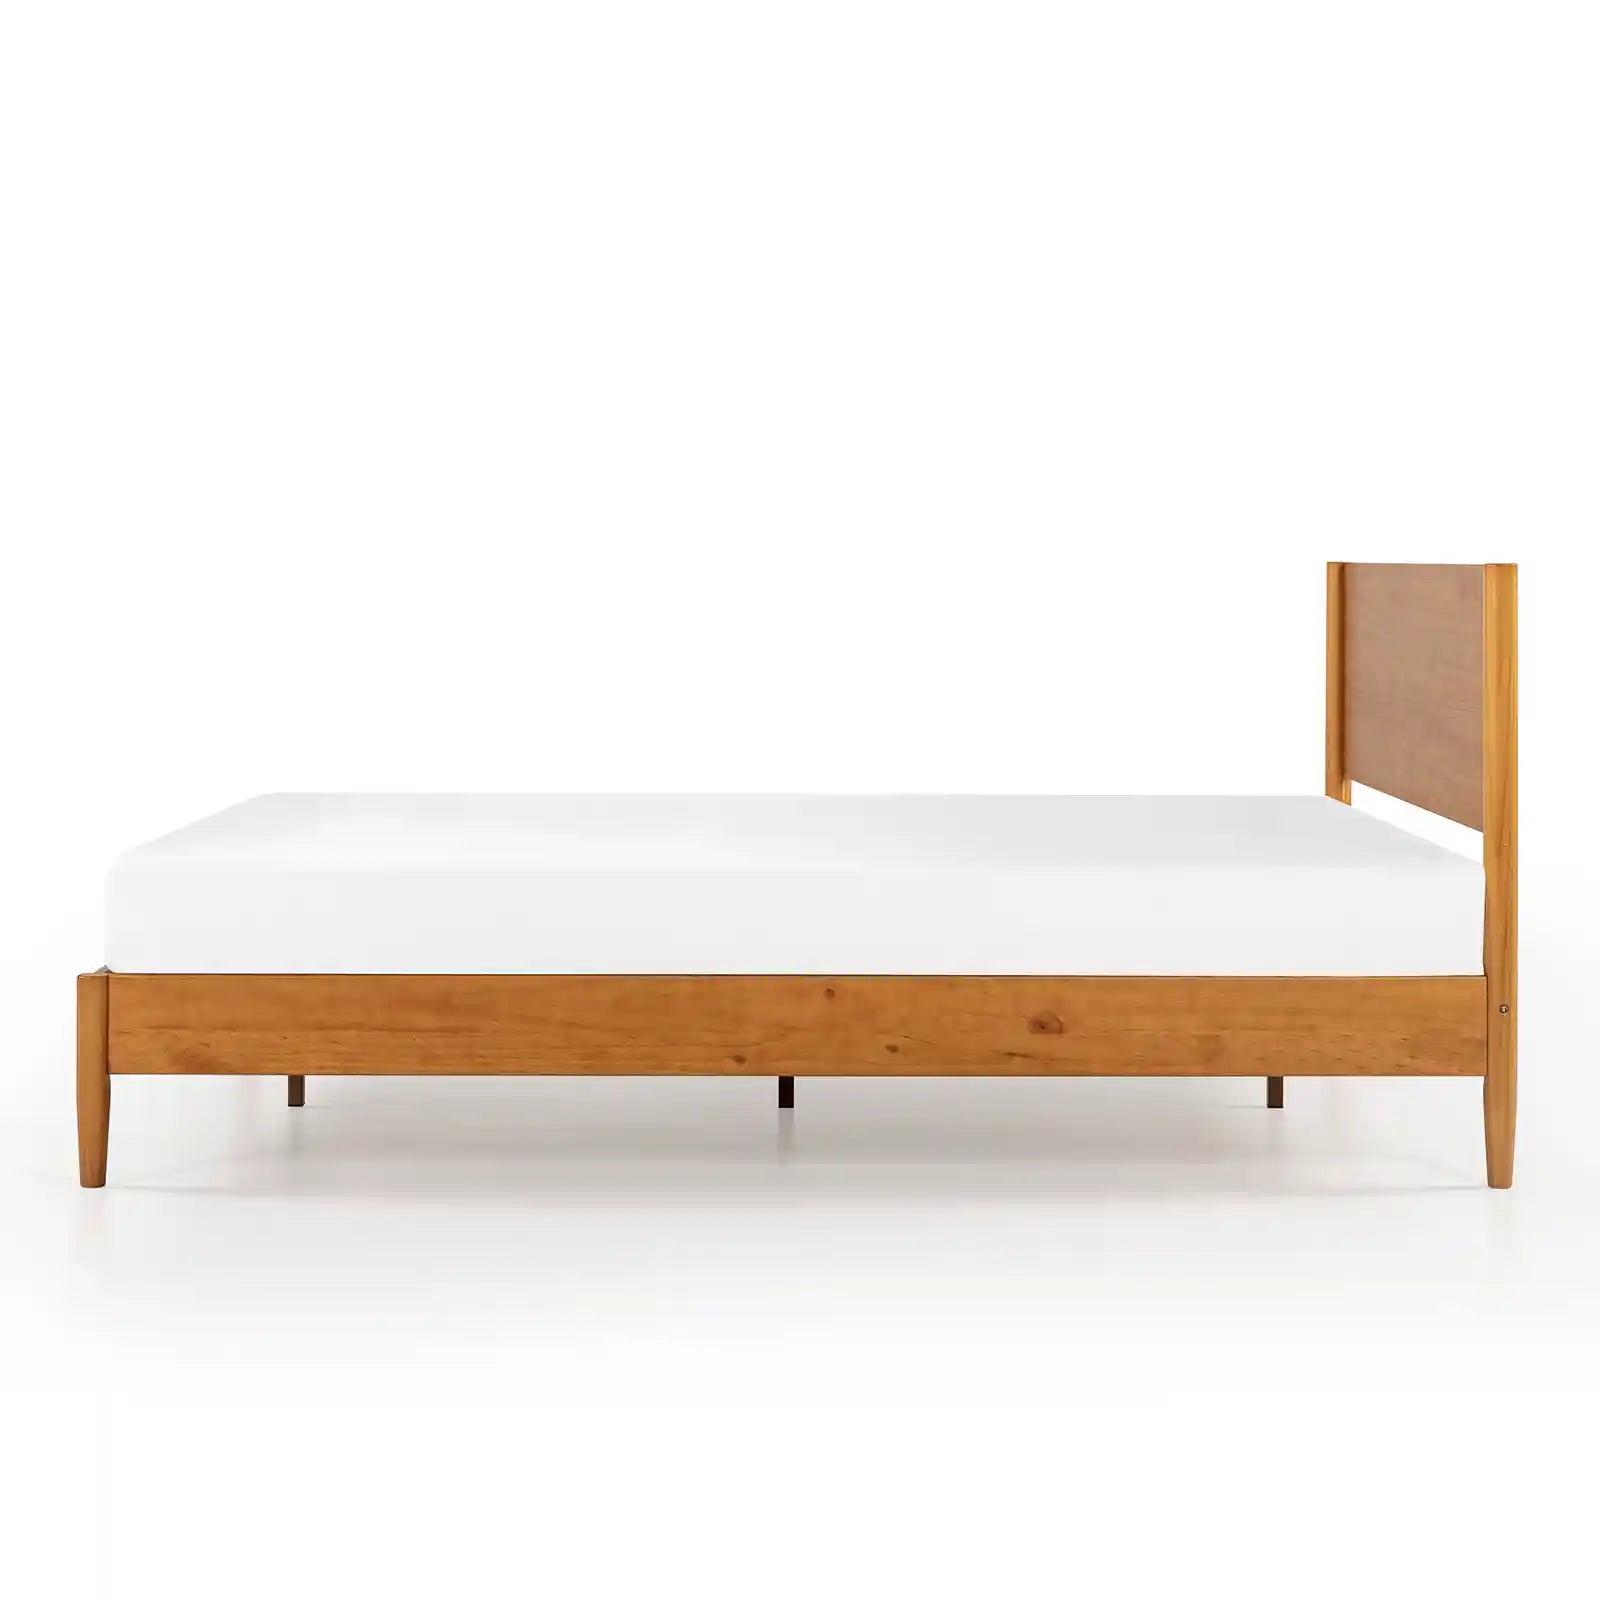 Mid Century Wood Platform Bed Frame with a Classic Design